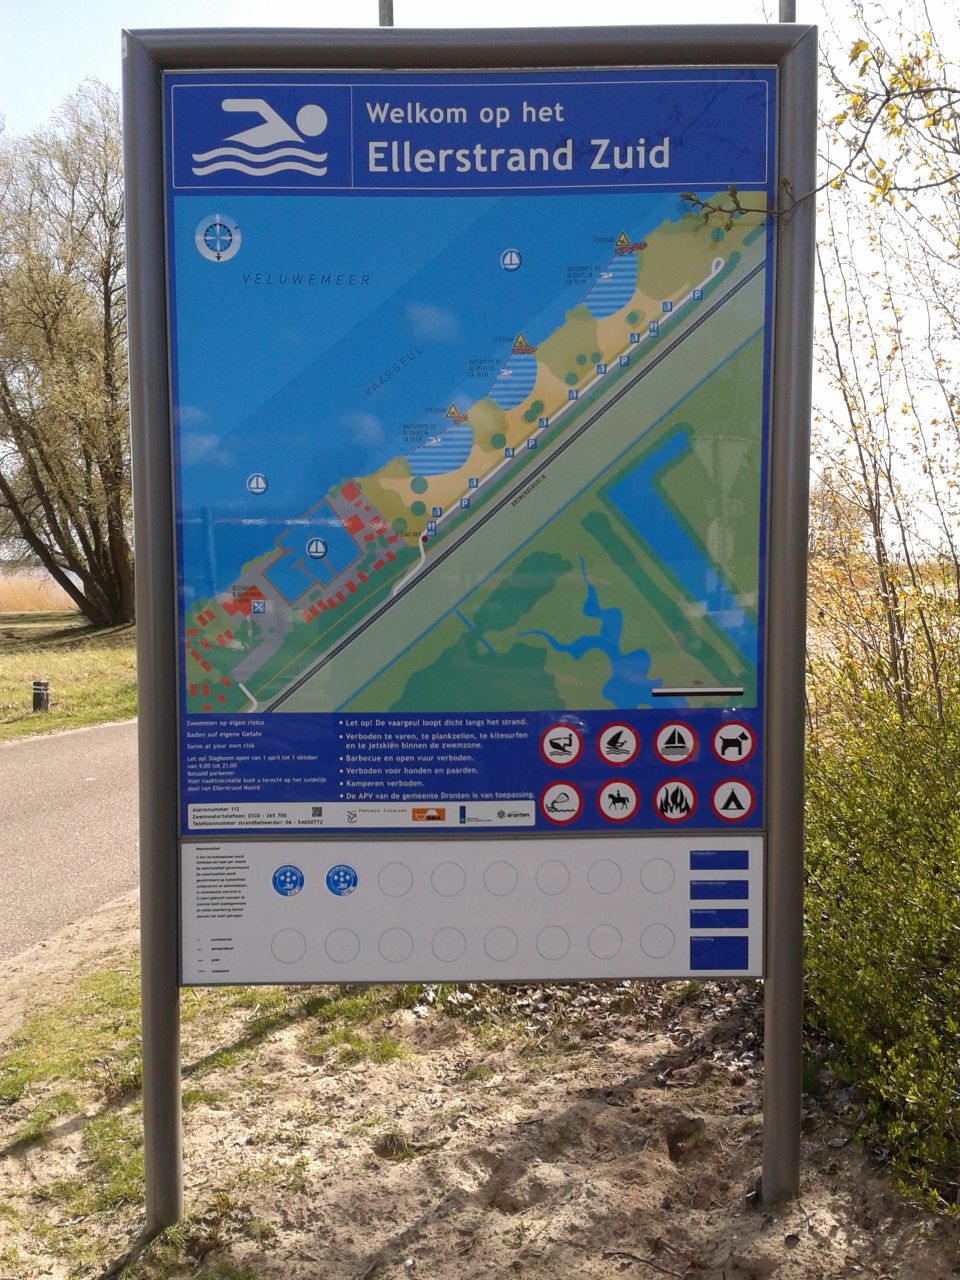 The information board at the swimming location Ellerstrand Zuid